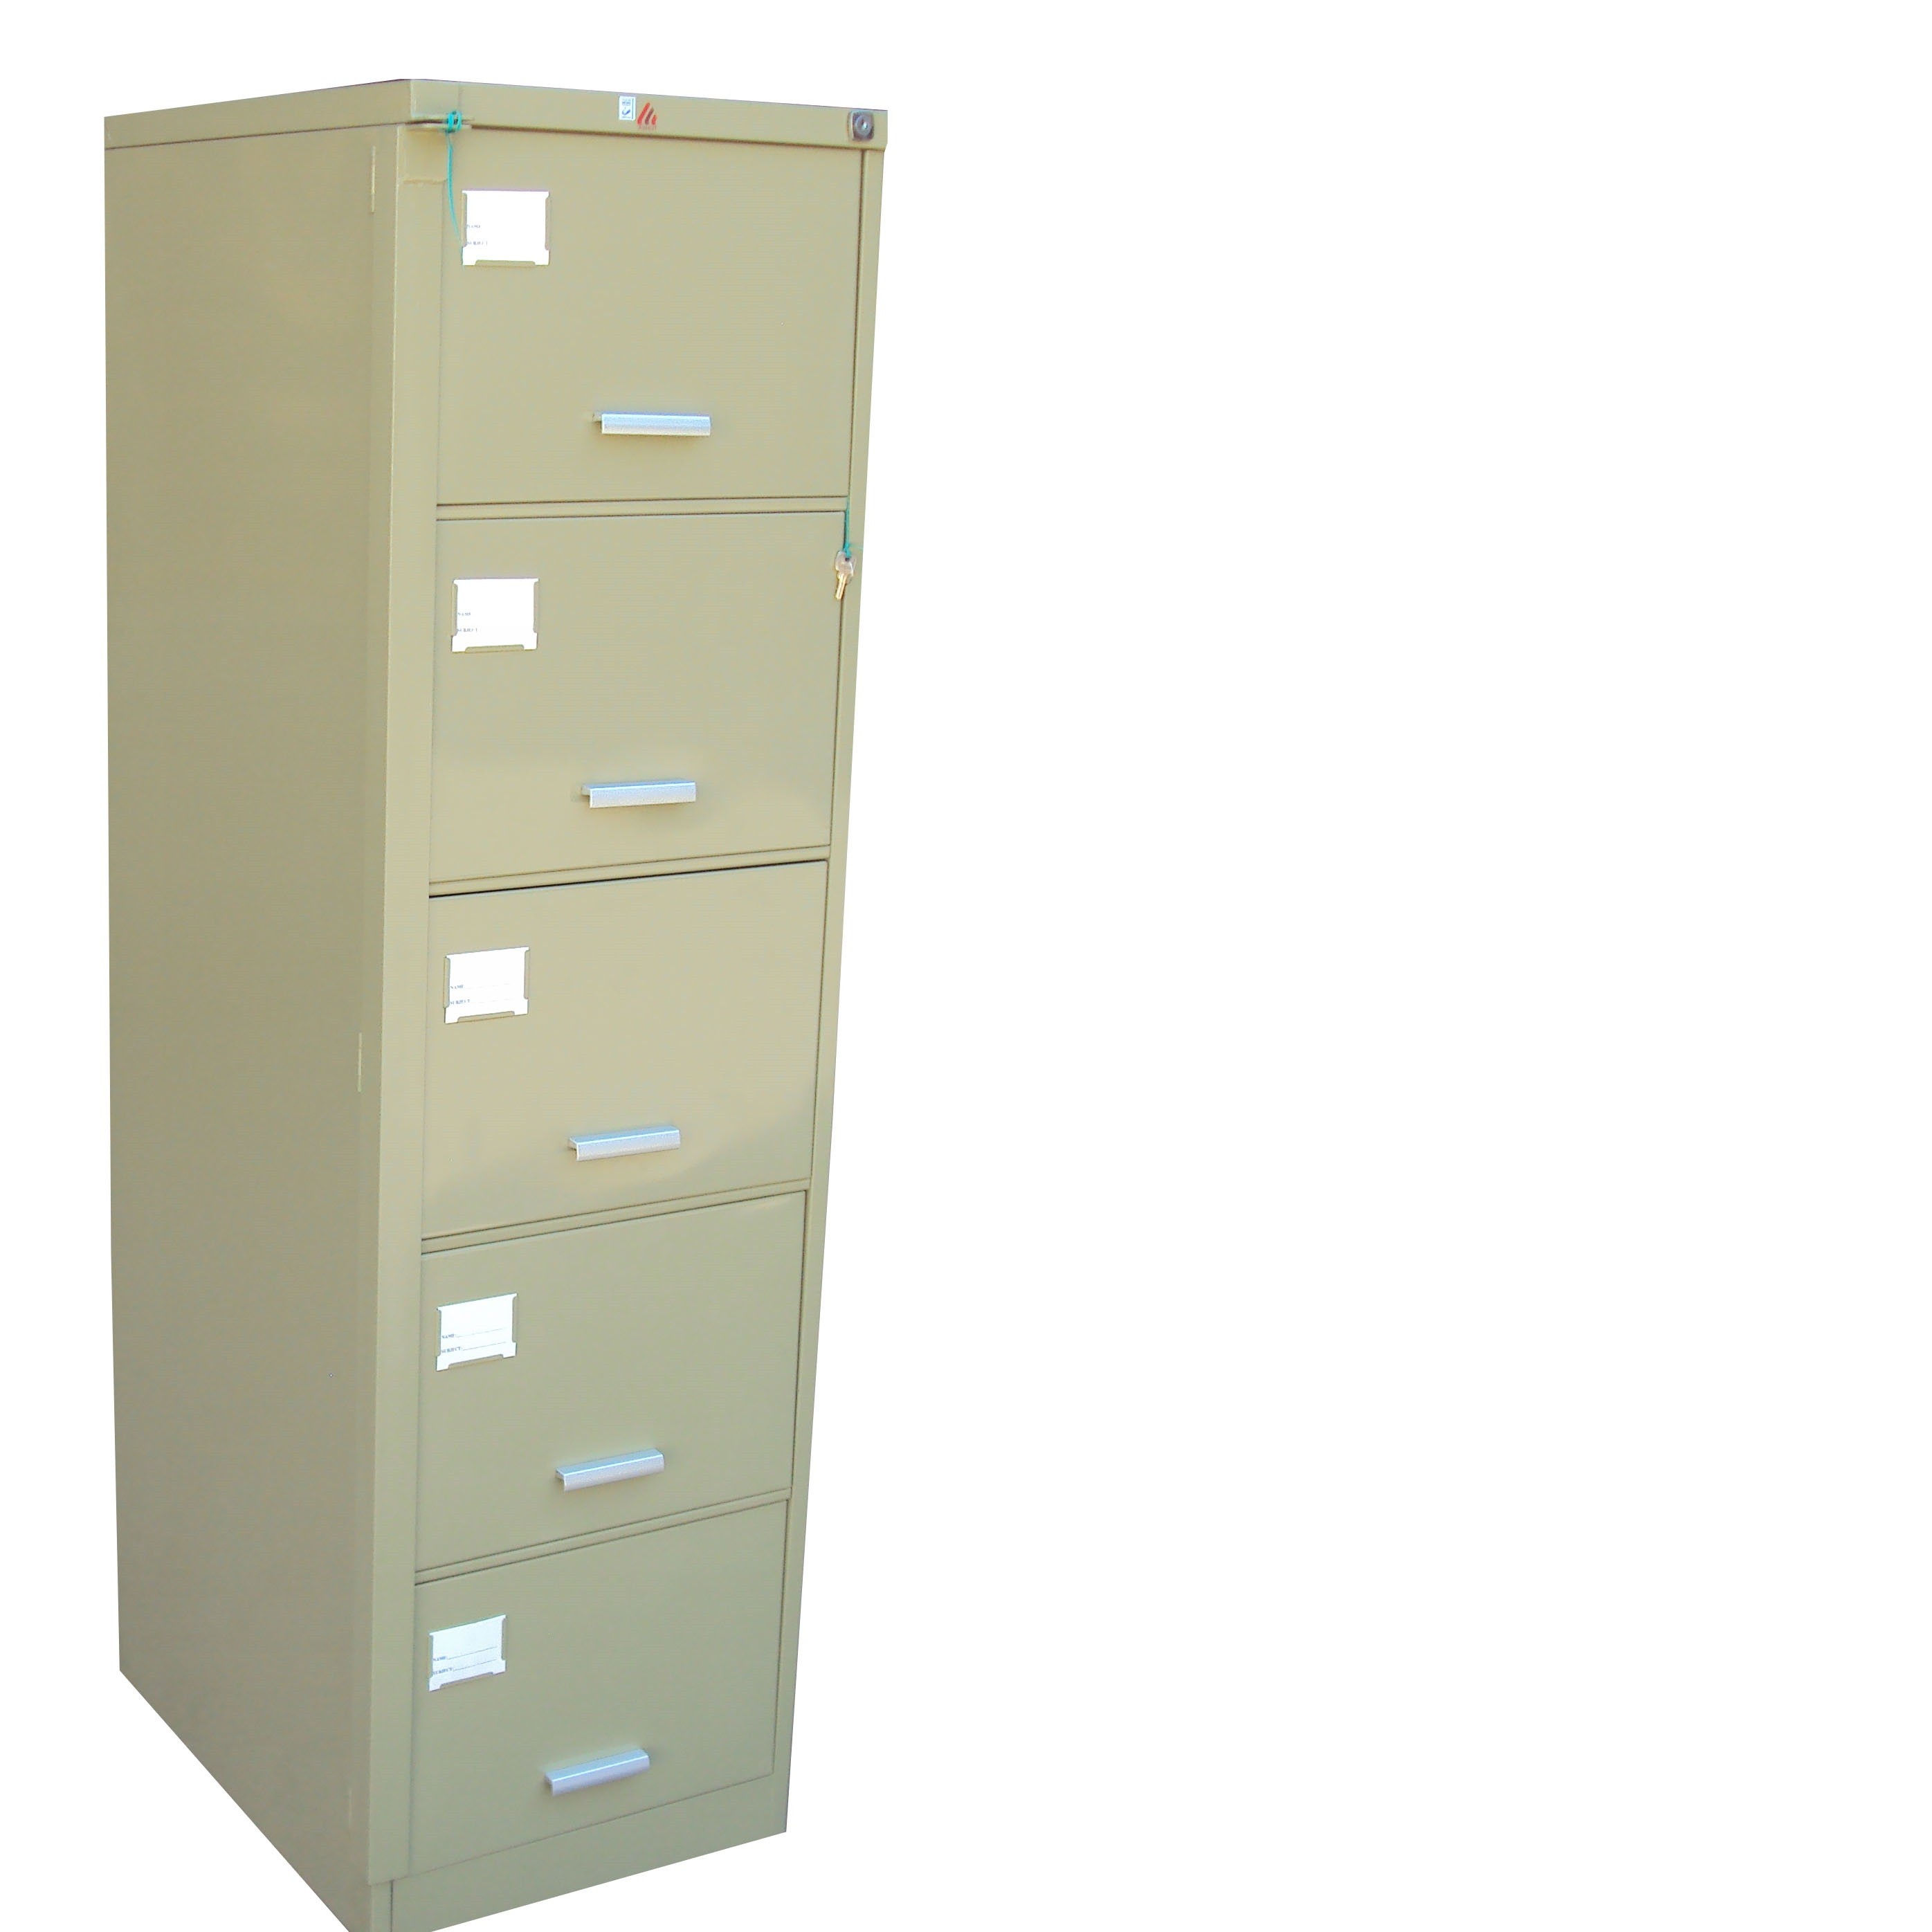 5 Drawer Filing Cabinet Ashut Engineers Limited in size 2792 X 2792